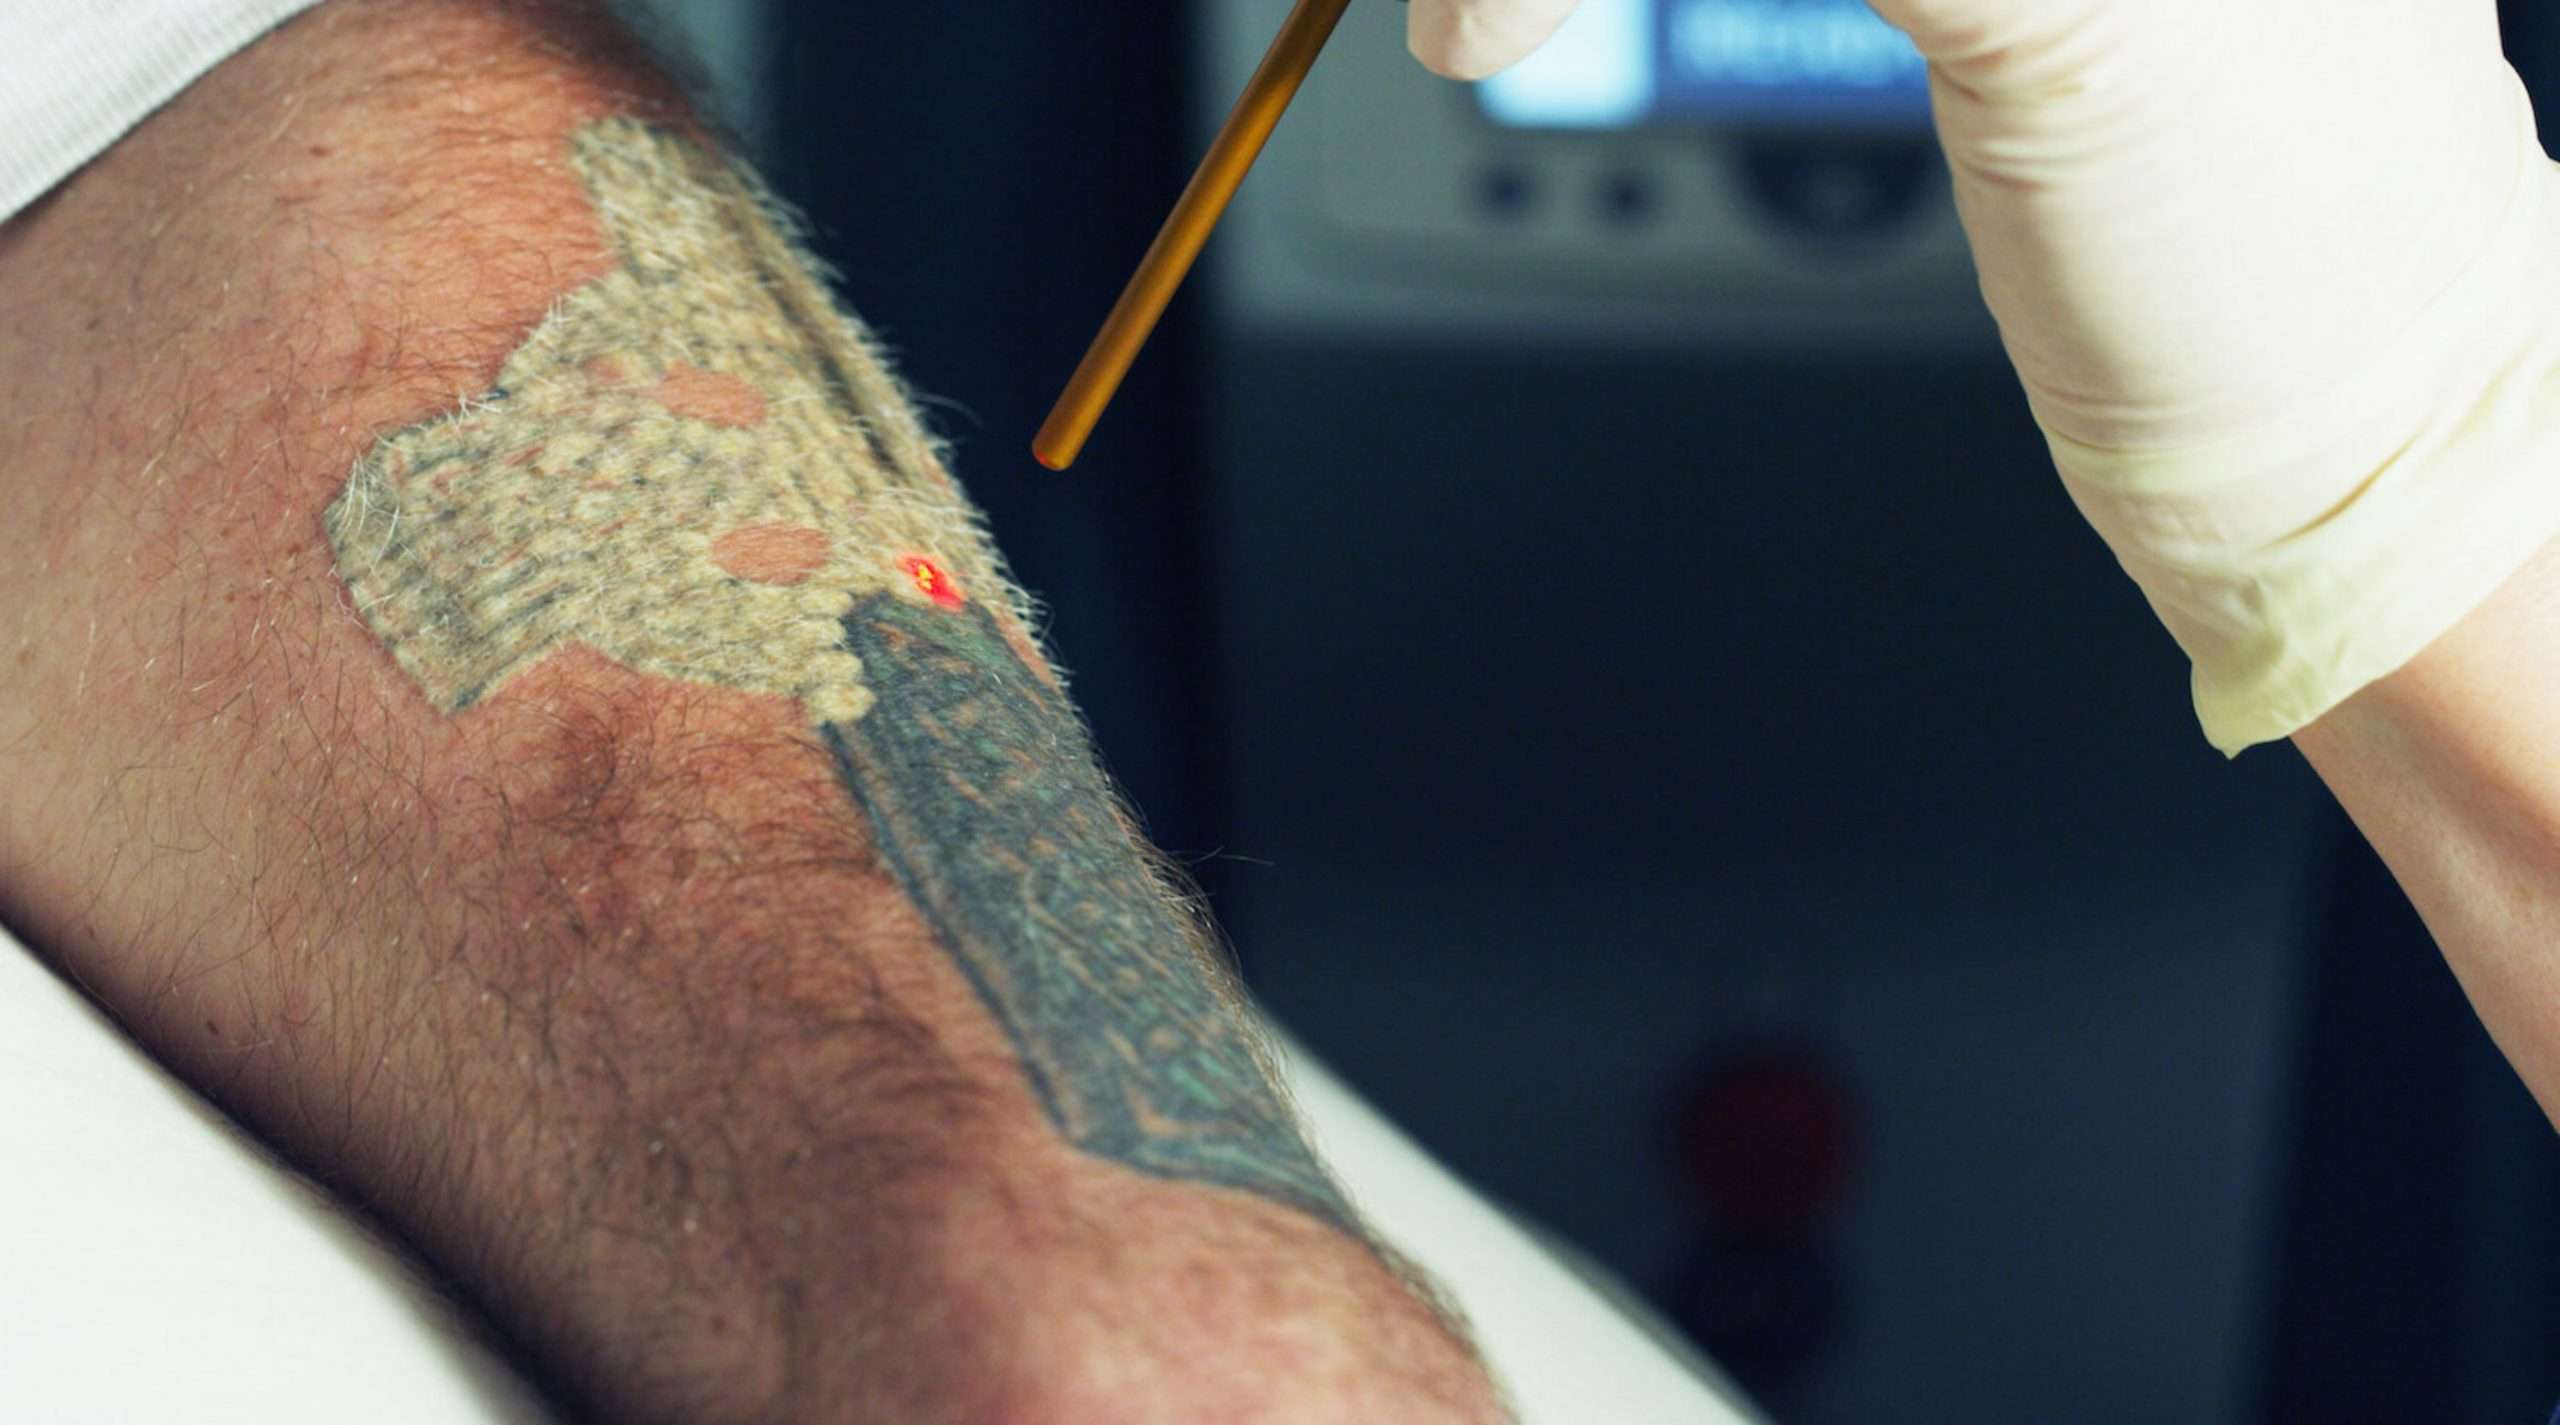 Baltimore Tattoo Removal Delivers Faster Clearance For Colorful Tattoos ...